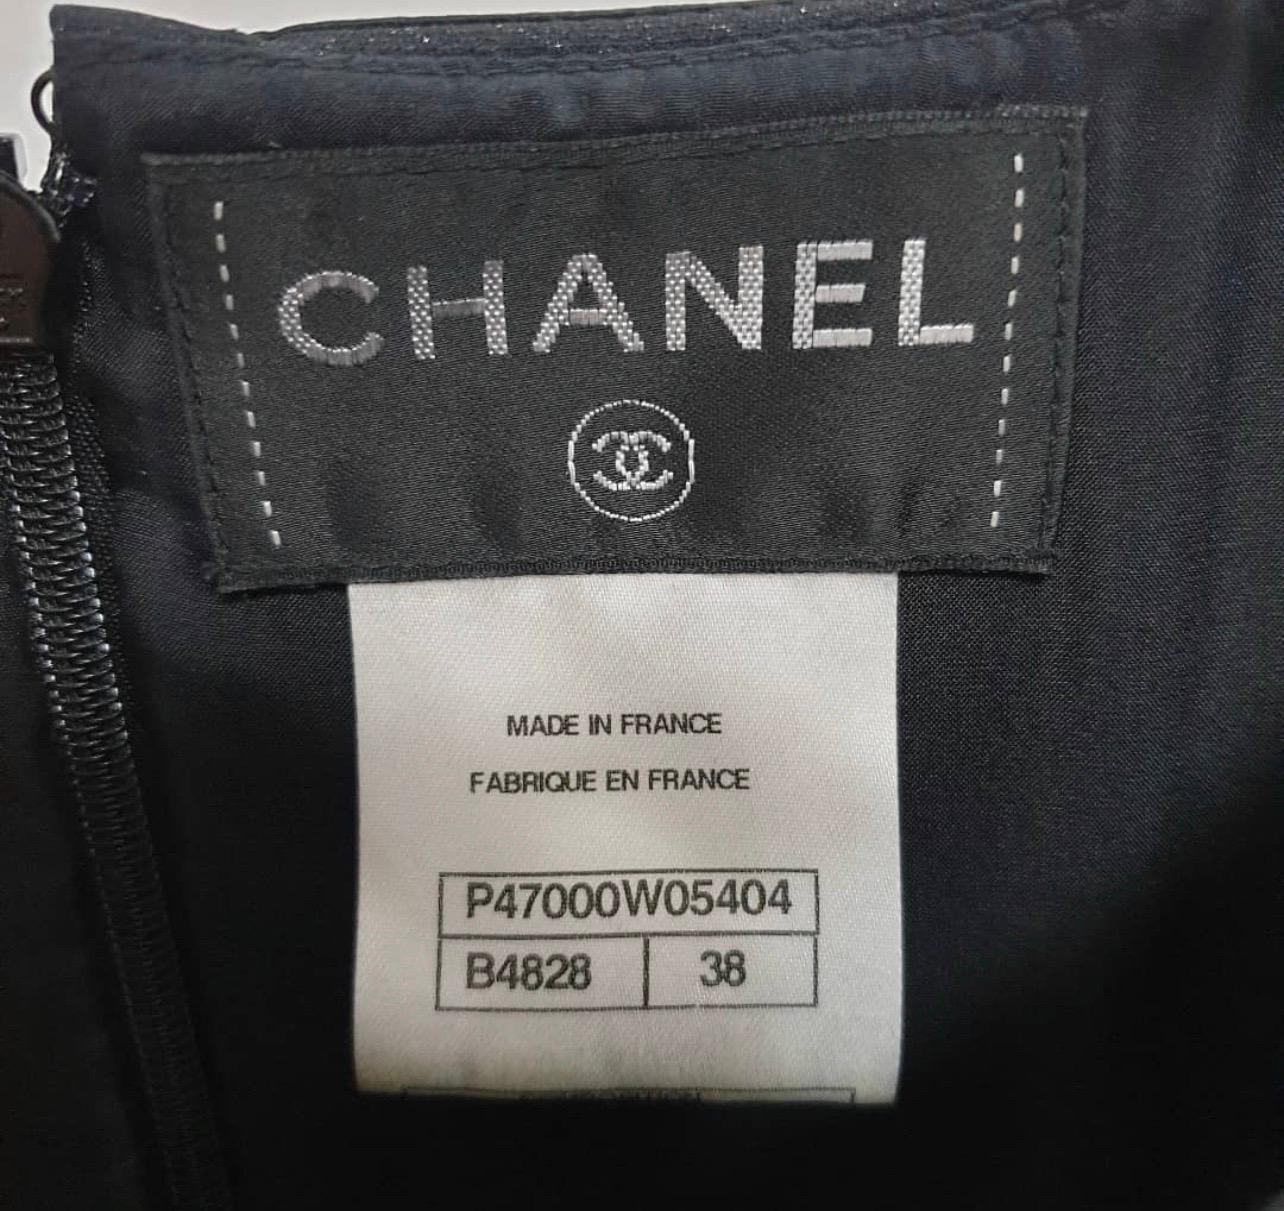 Chanel's Fall/Winter 2013/2014 ready-to-wear collection.
Sz.38
Very good condition.
Hanger is not inclided.